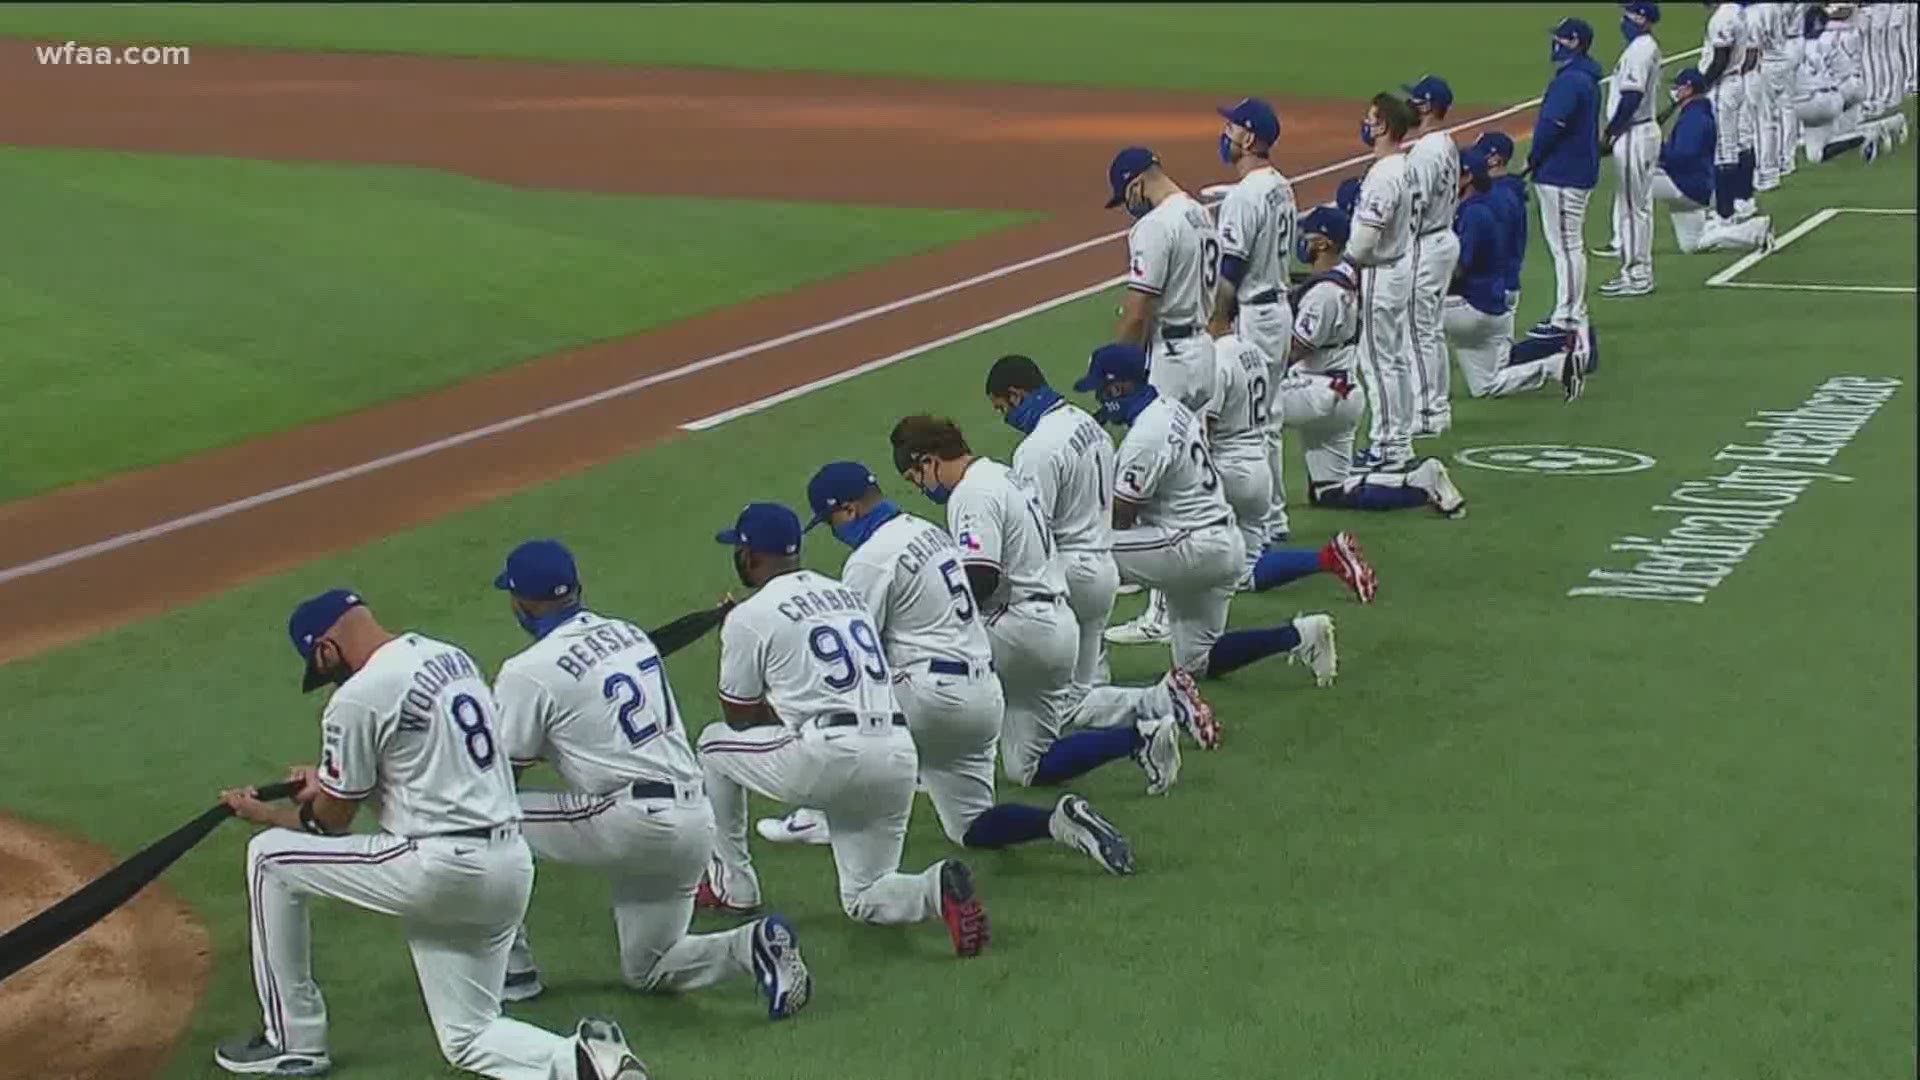 Before the national anthem, the Rangers took time to honor those who have lose their lives due to coronavirus and crimes of racial injustice.